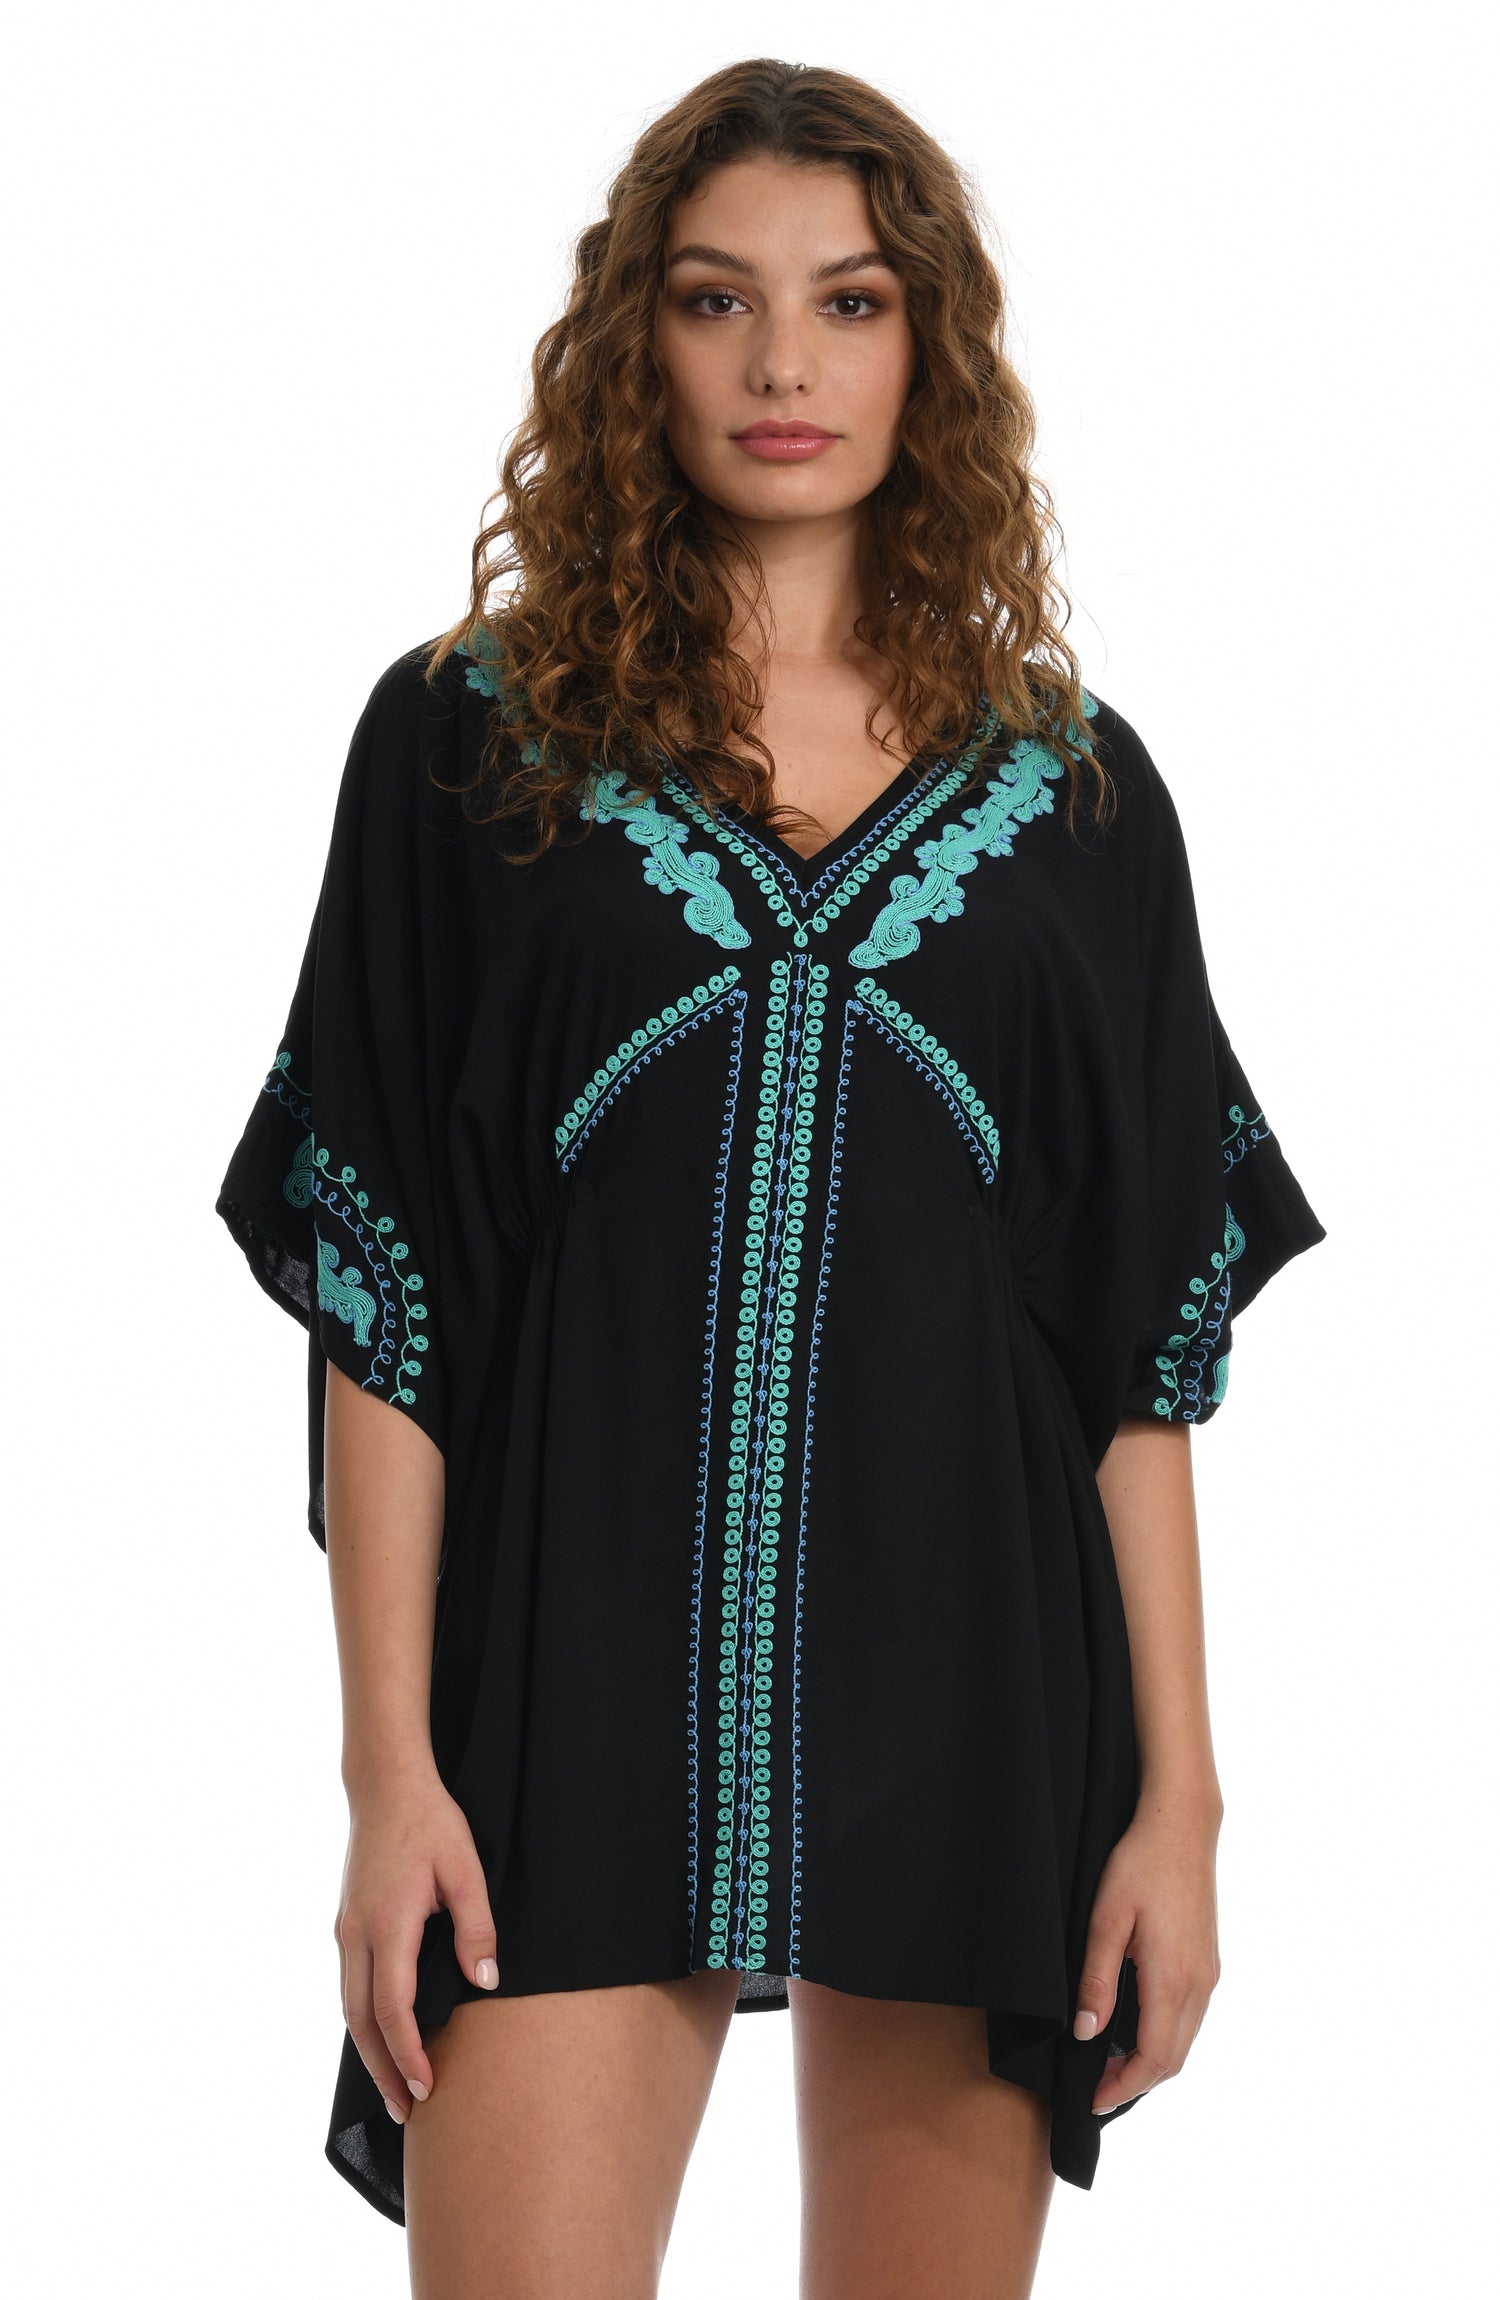 Model is wearing a black V-Neck tunic swimsuit cover up detailed with turquoise embroidered accents from our Hippie Trail collection.